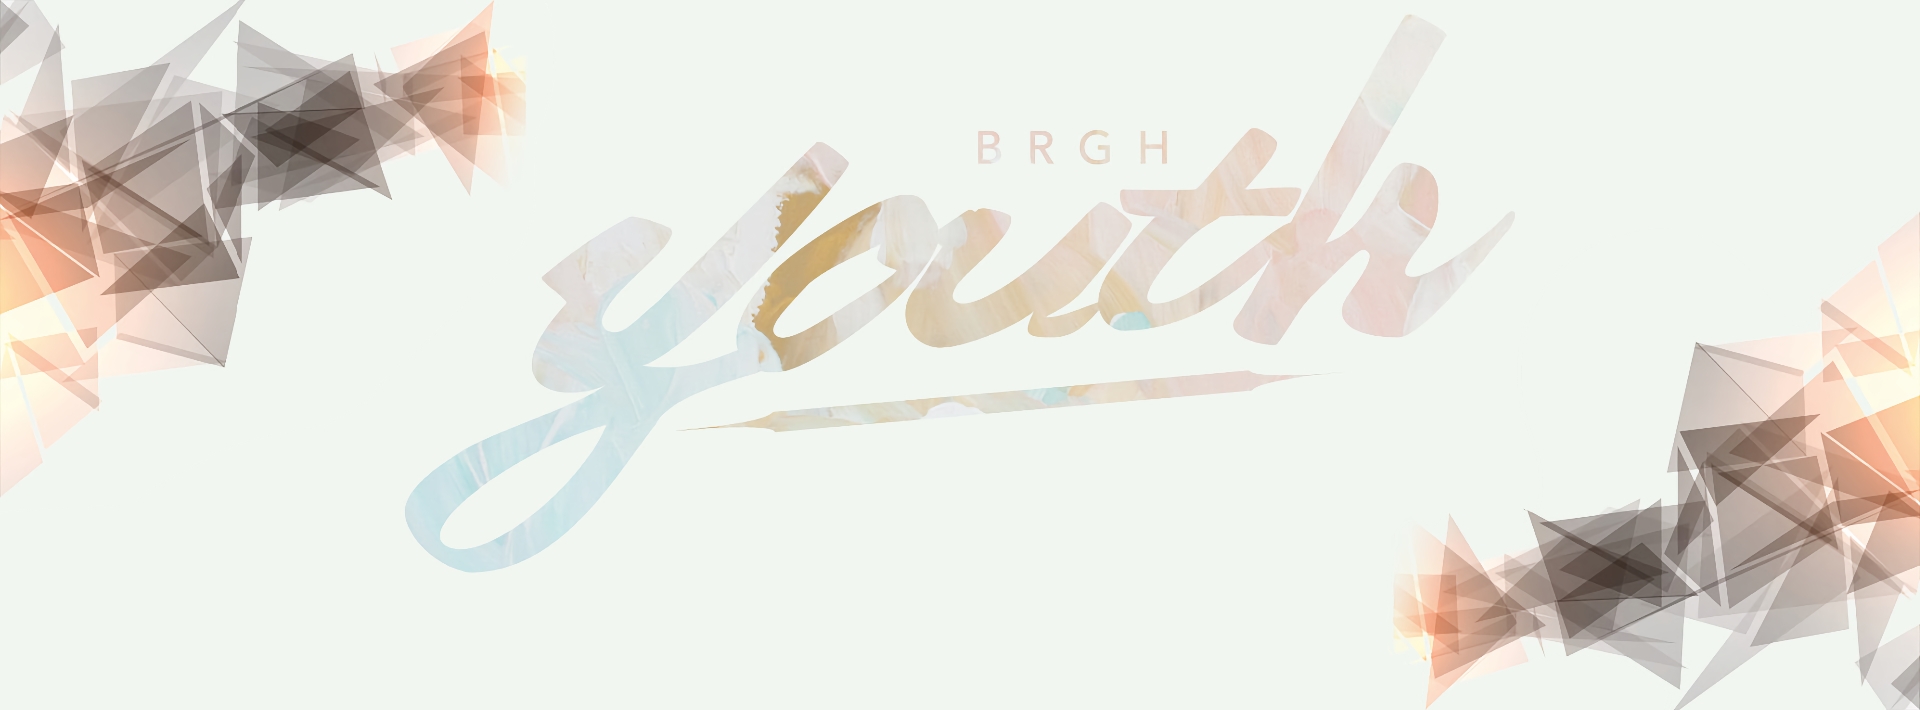 BRGH Youth